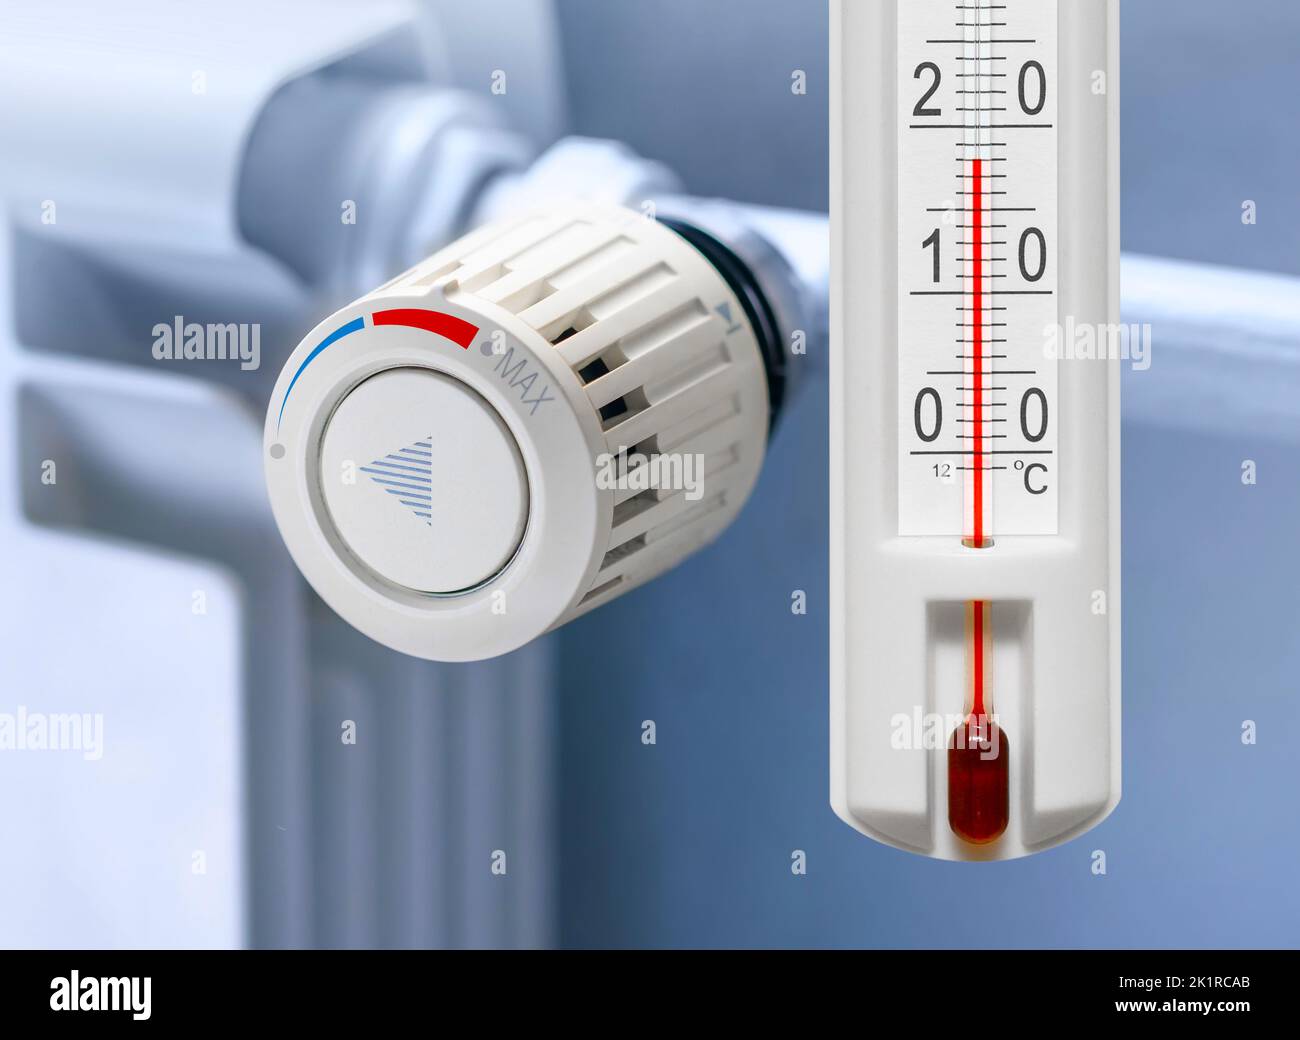 Heating radiator thermostat set to low temperature and room thermometer for saving money at heating costs. Energy crisis, energy efficiency and rising Stock Photo